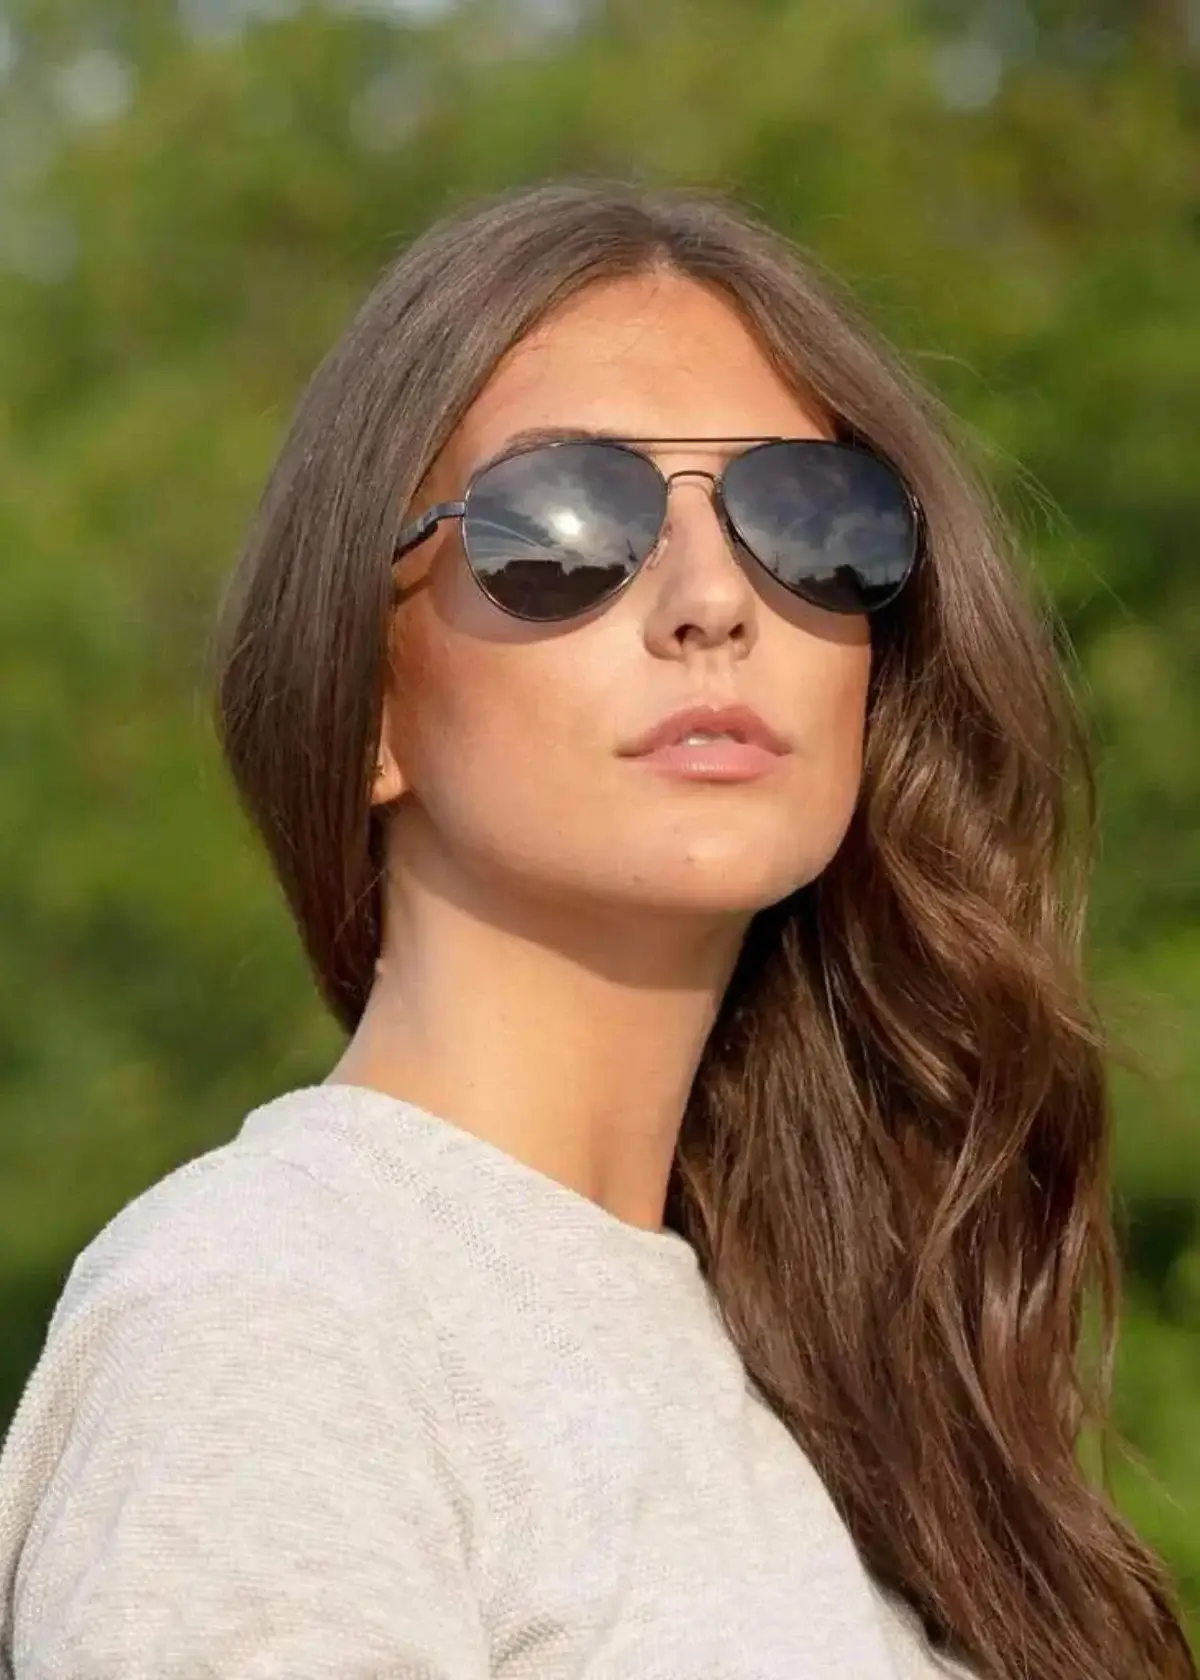 Why do angular sunglasses work well for oval faces?